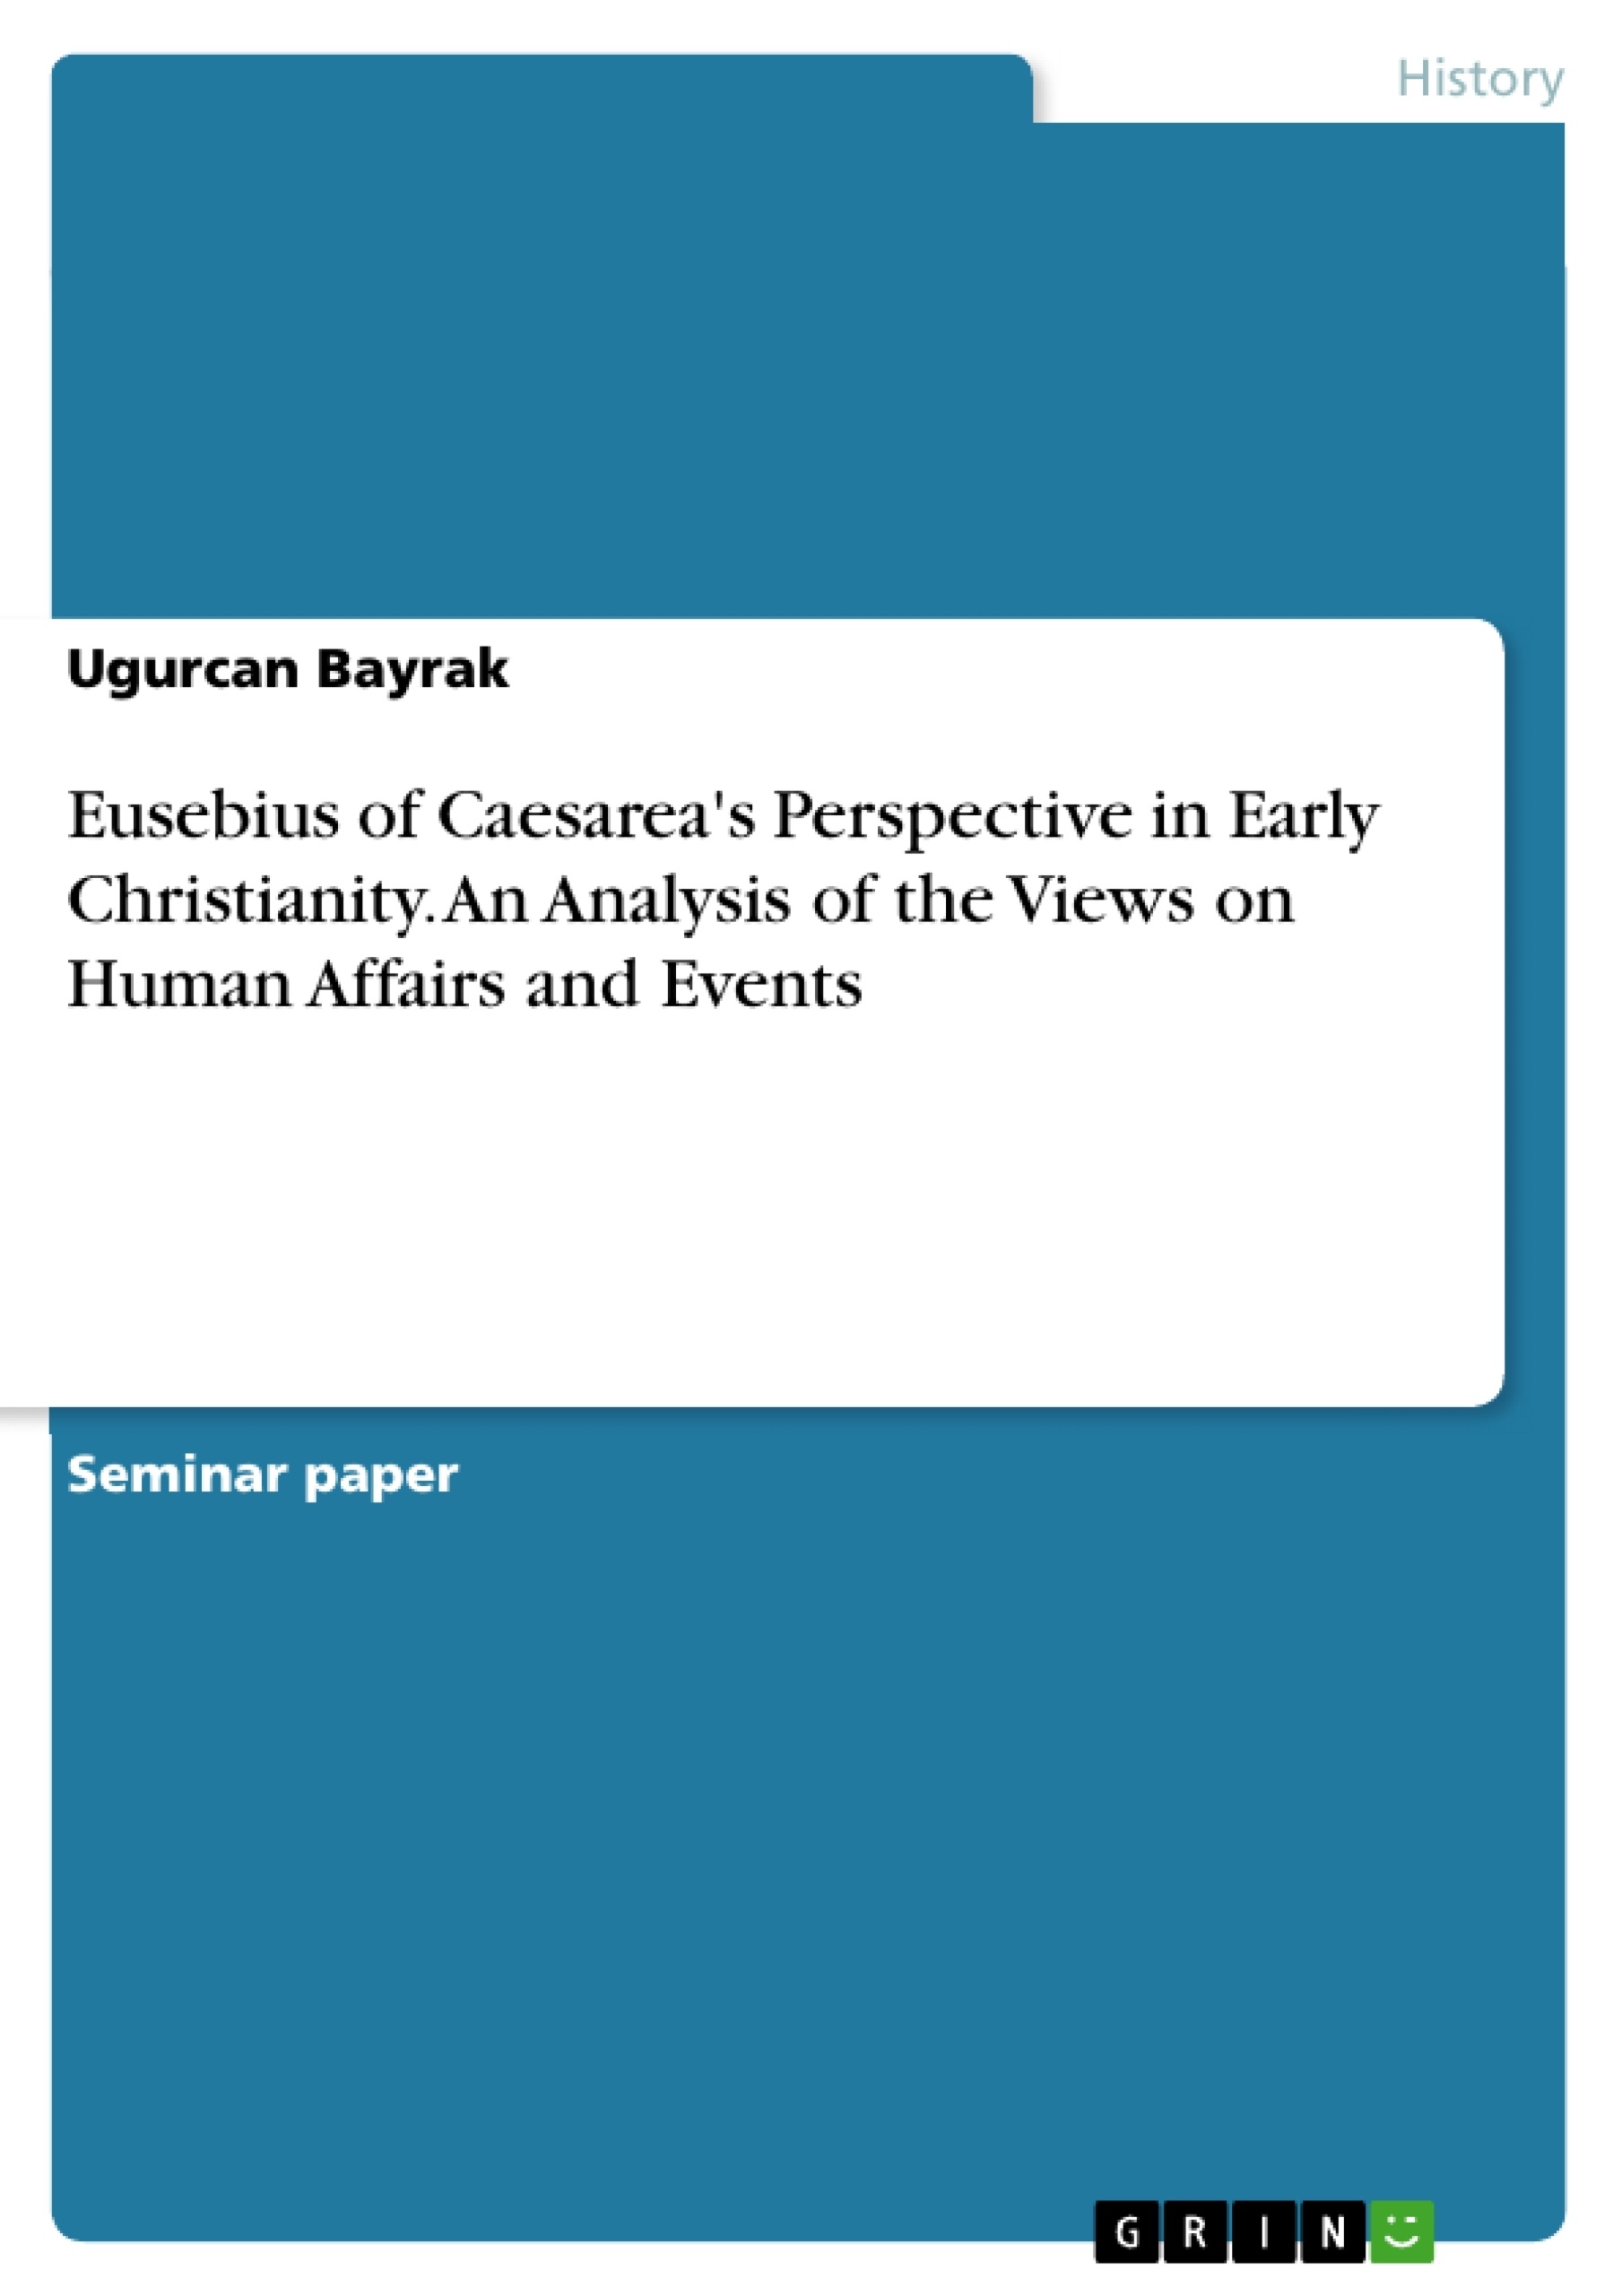 Title: Eusebius of Caesarea's Perspective in Early Christianity. An Analysis of the Views on Human Affairs and Events